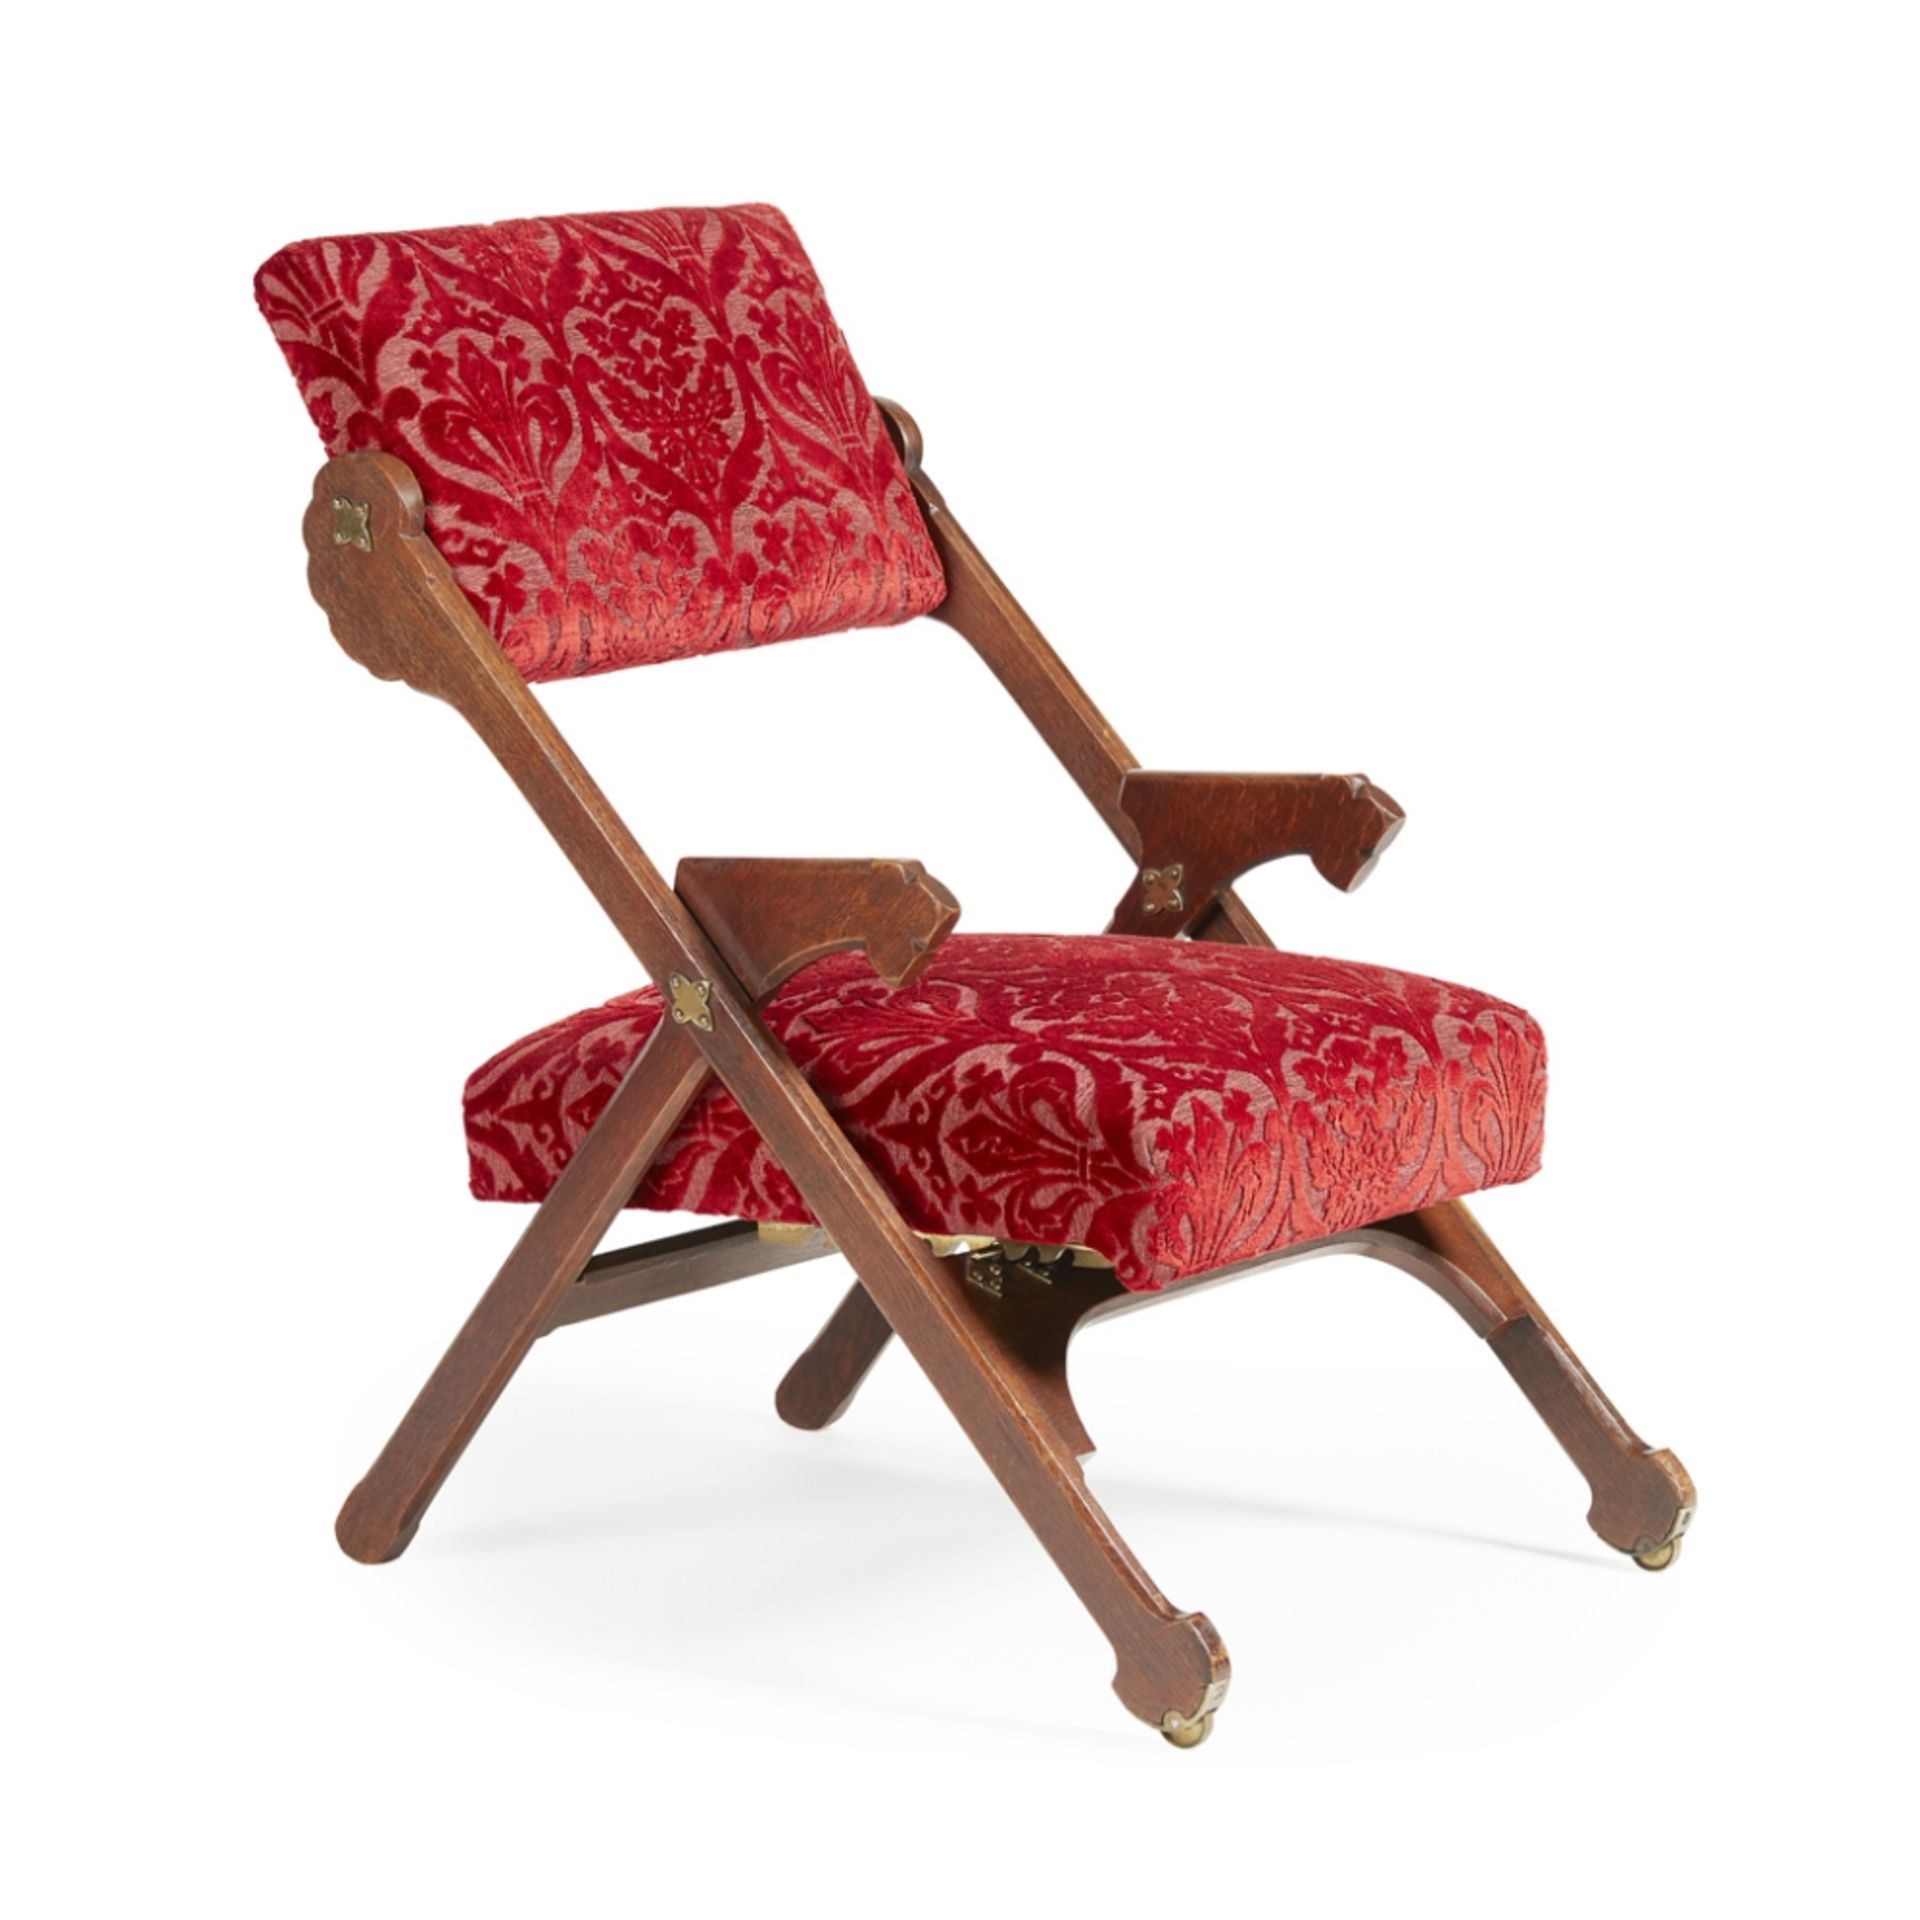 ATTRIBUTED TO CHARLES BEVANGOTHIC REVIVAL OAK ADJUSTABLE FOLDING ARMCHAIR, CIRCA 1870 upholstered in